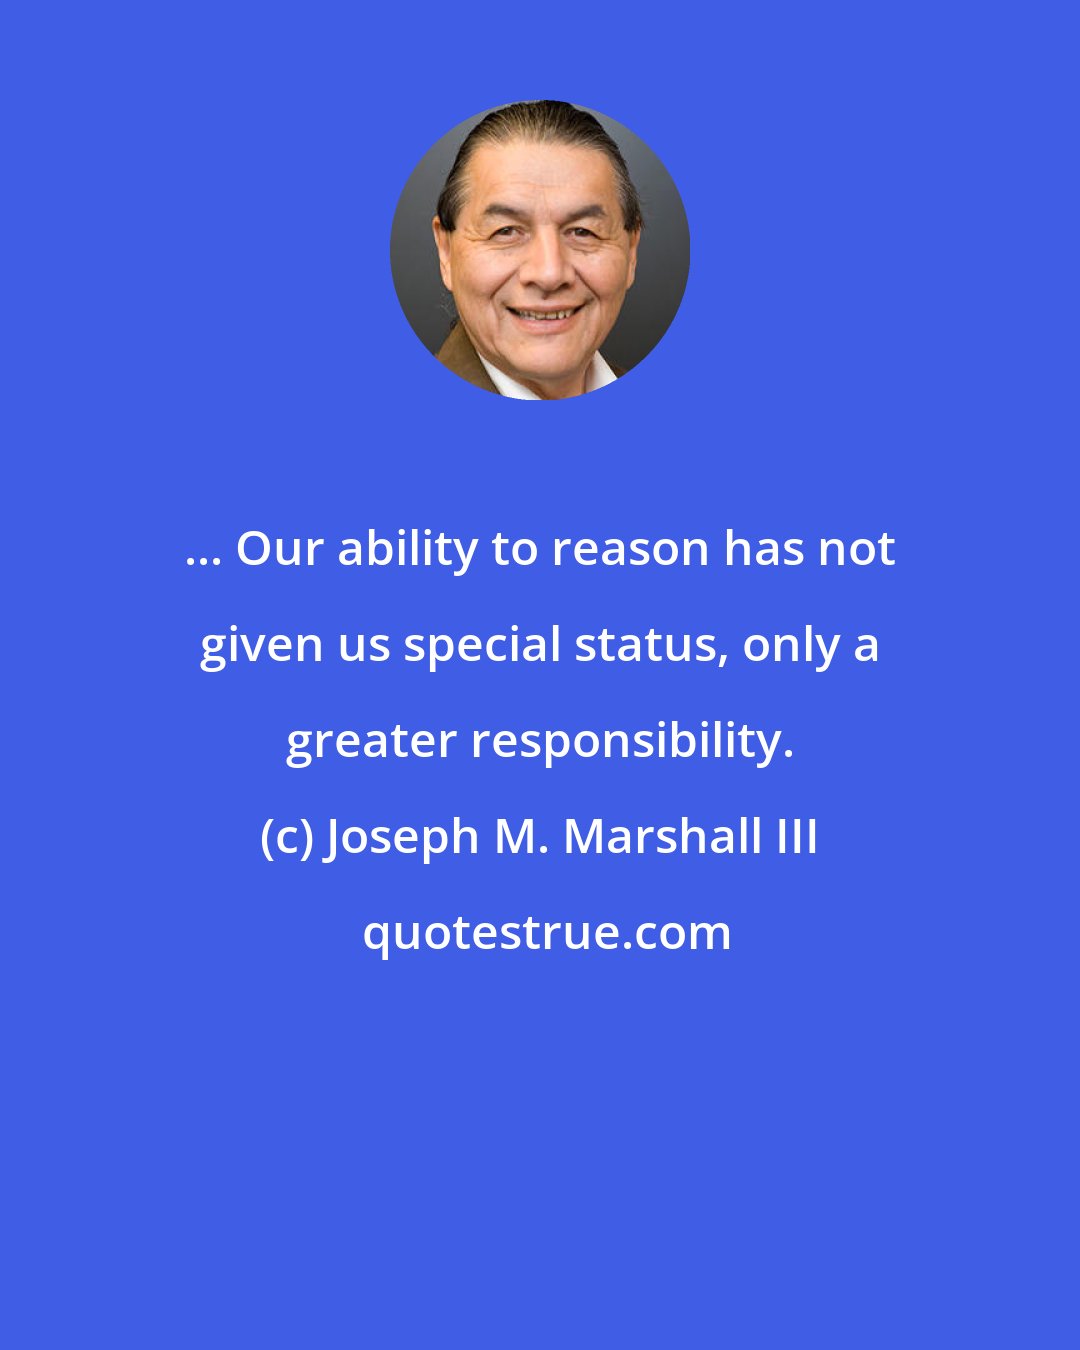 Joseph M. Marshall III: ... Our ability to reason has not given us special status, only a greater responsibility.